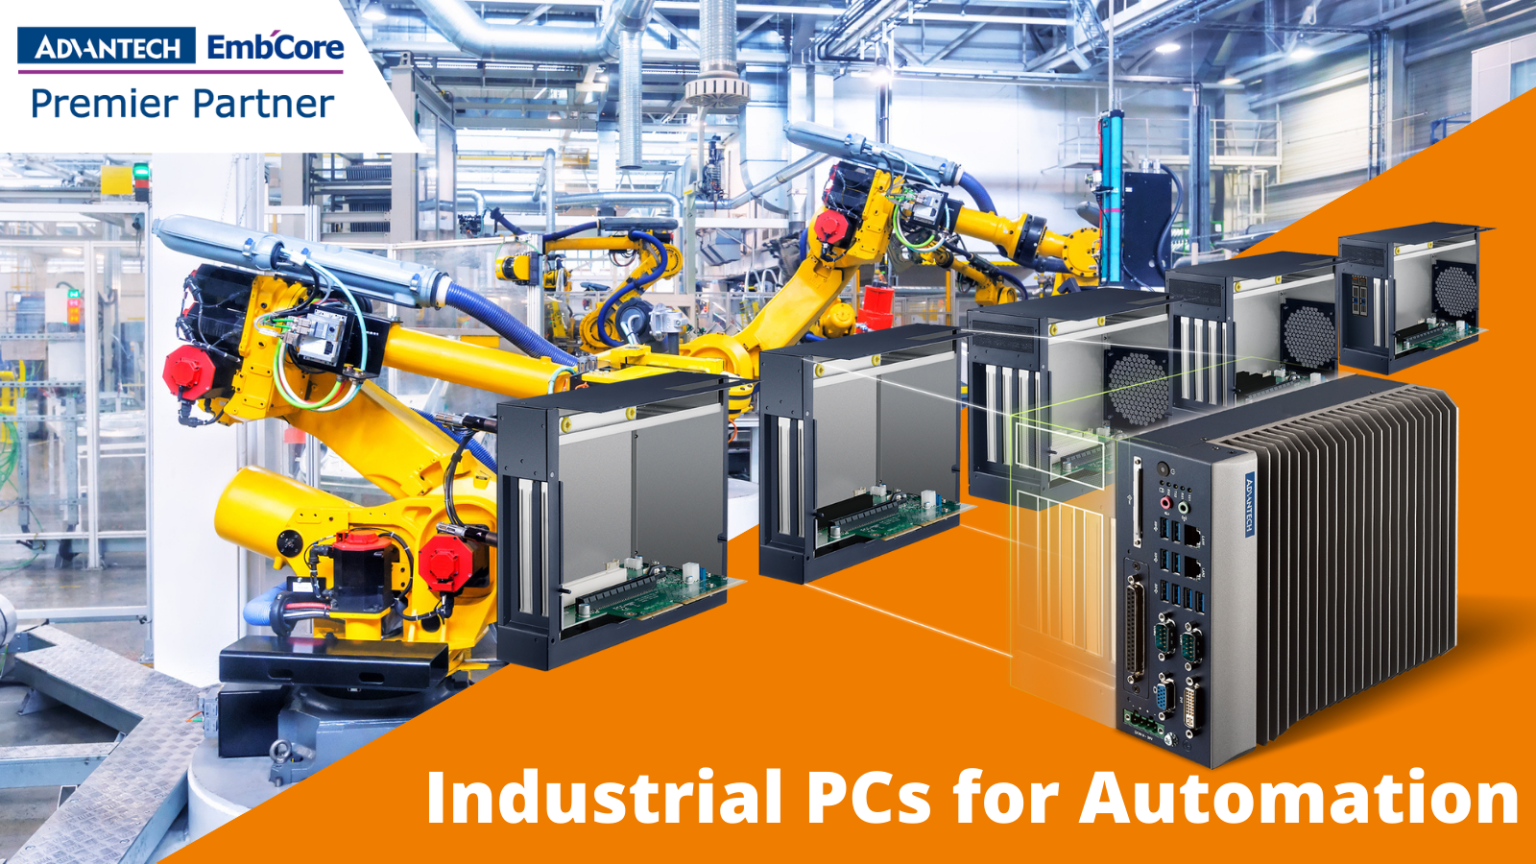 Industrial PCs for Automation at aaronn electronic gmbh